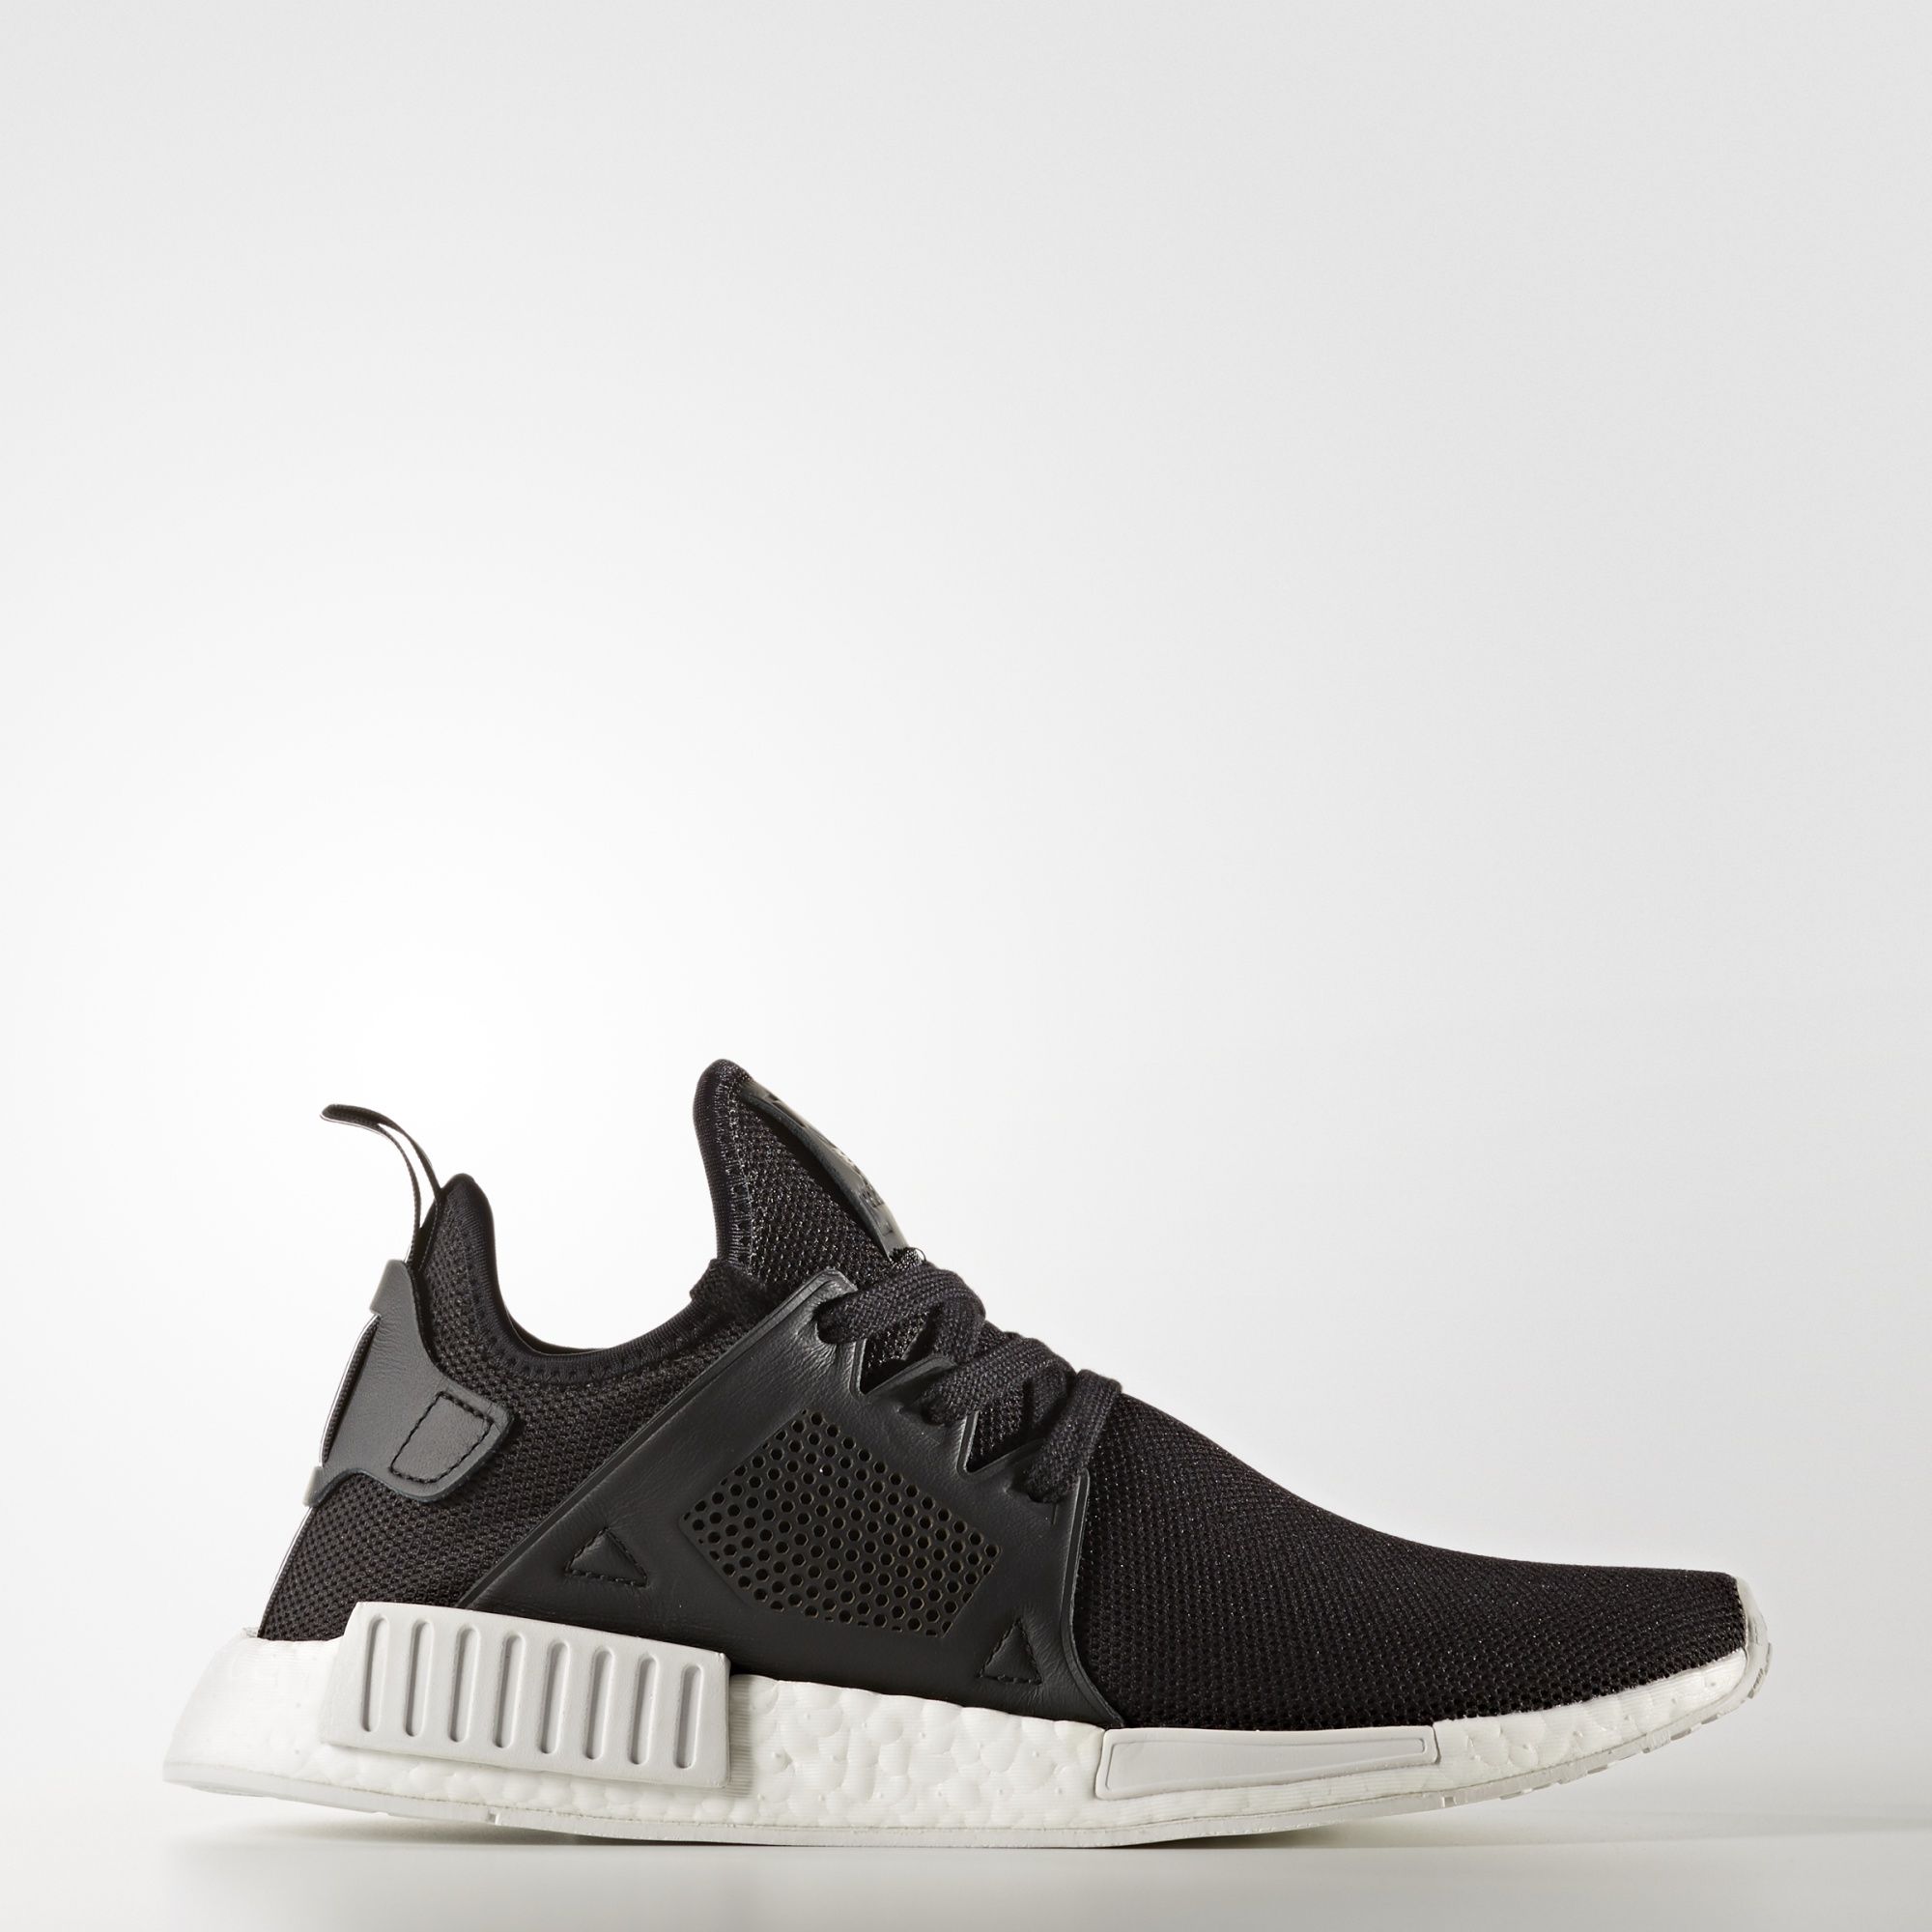 adidas-nmd_xr1-core-black-leather-cage-2